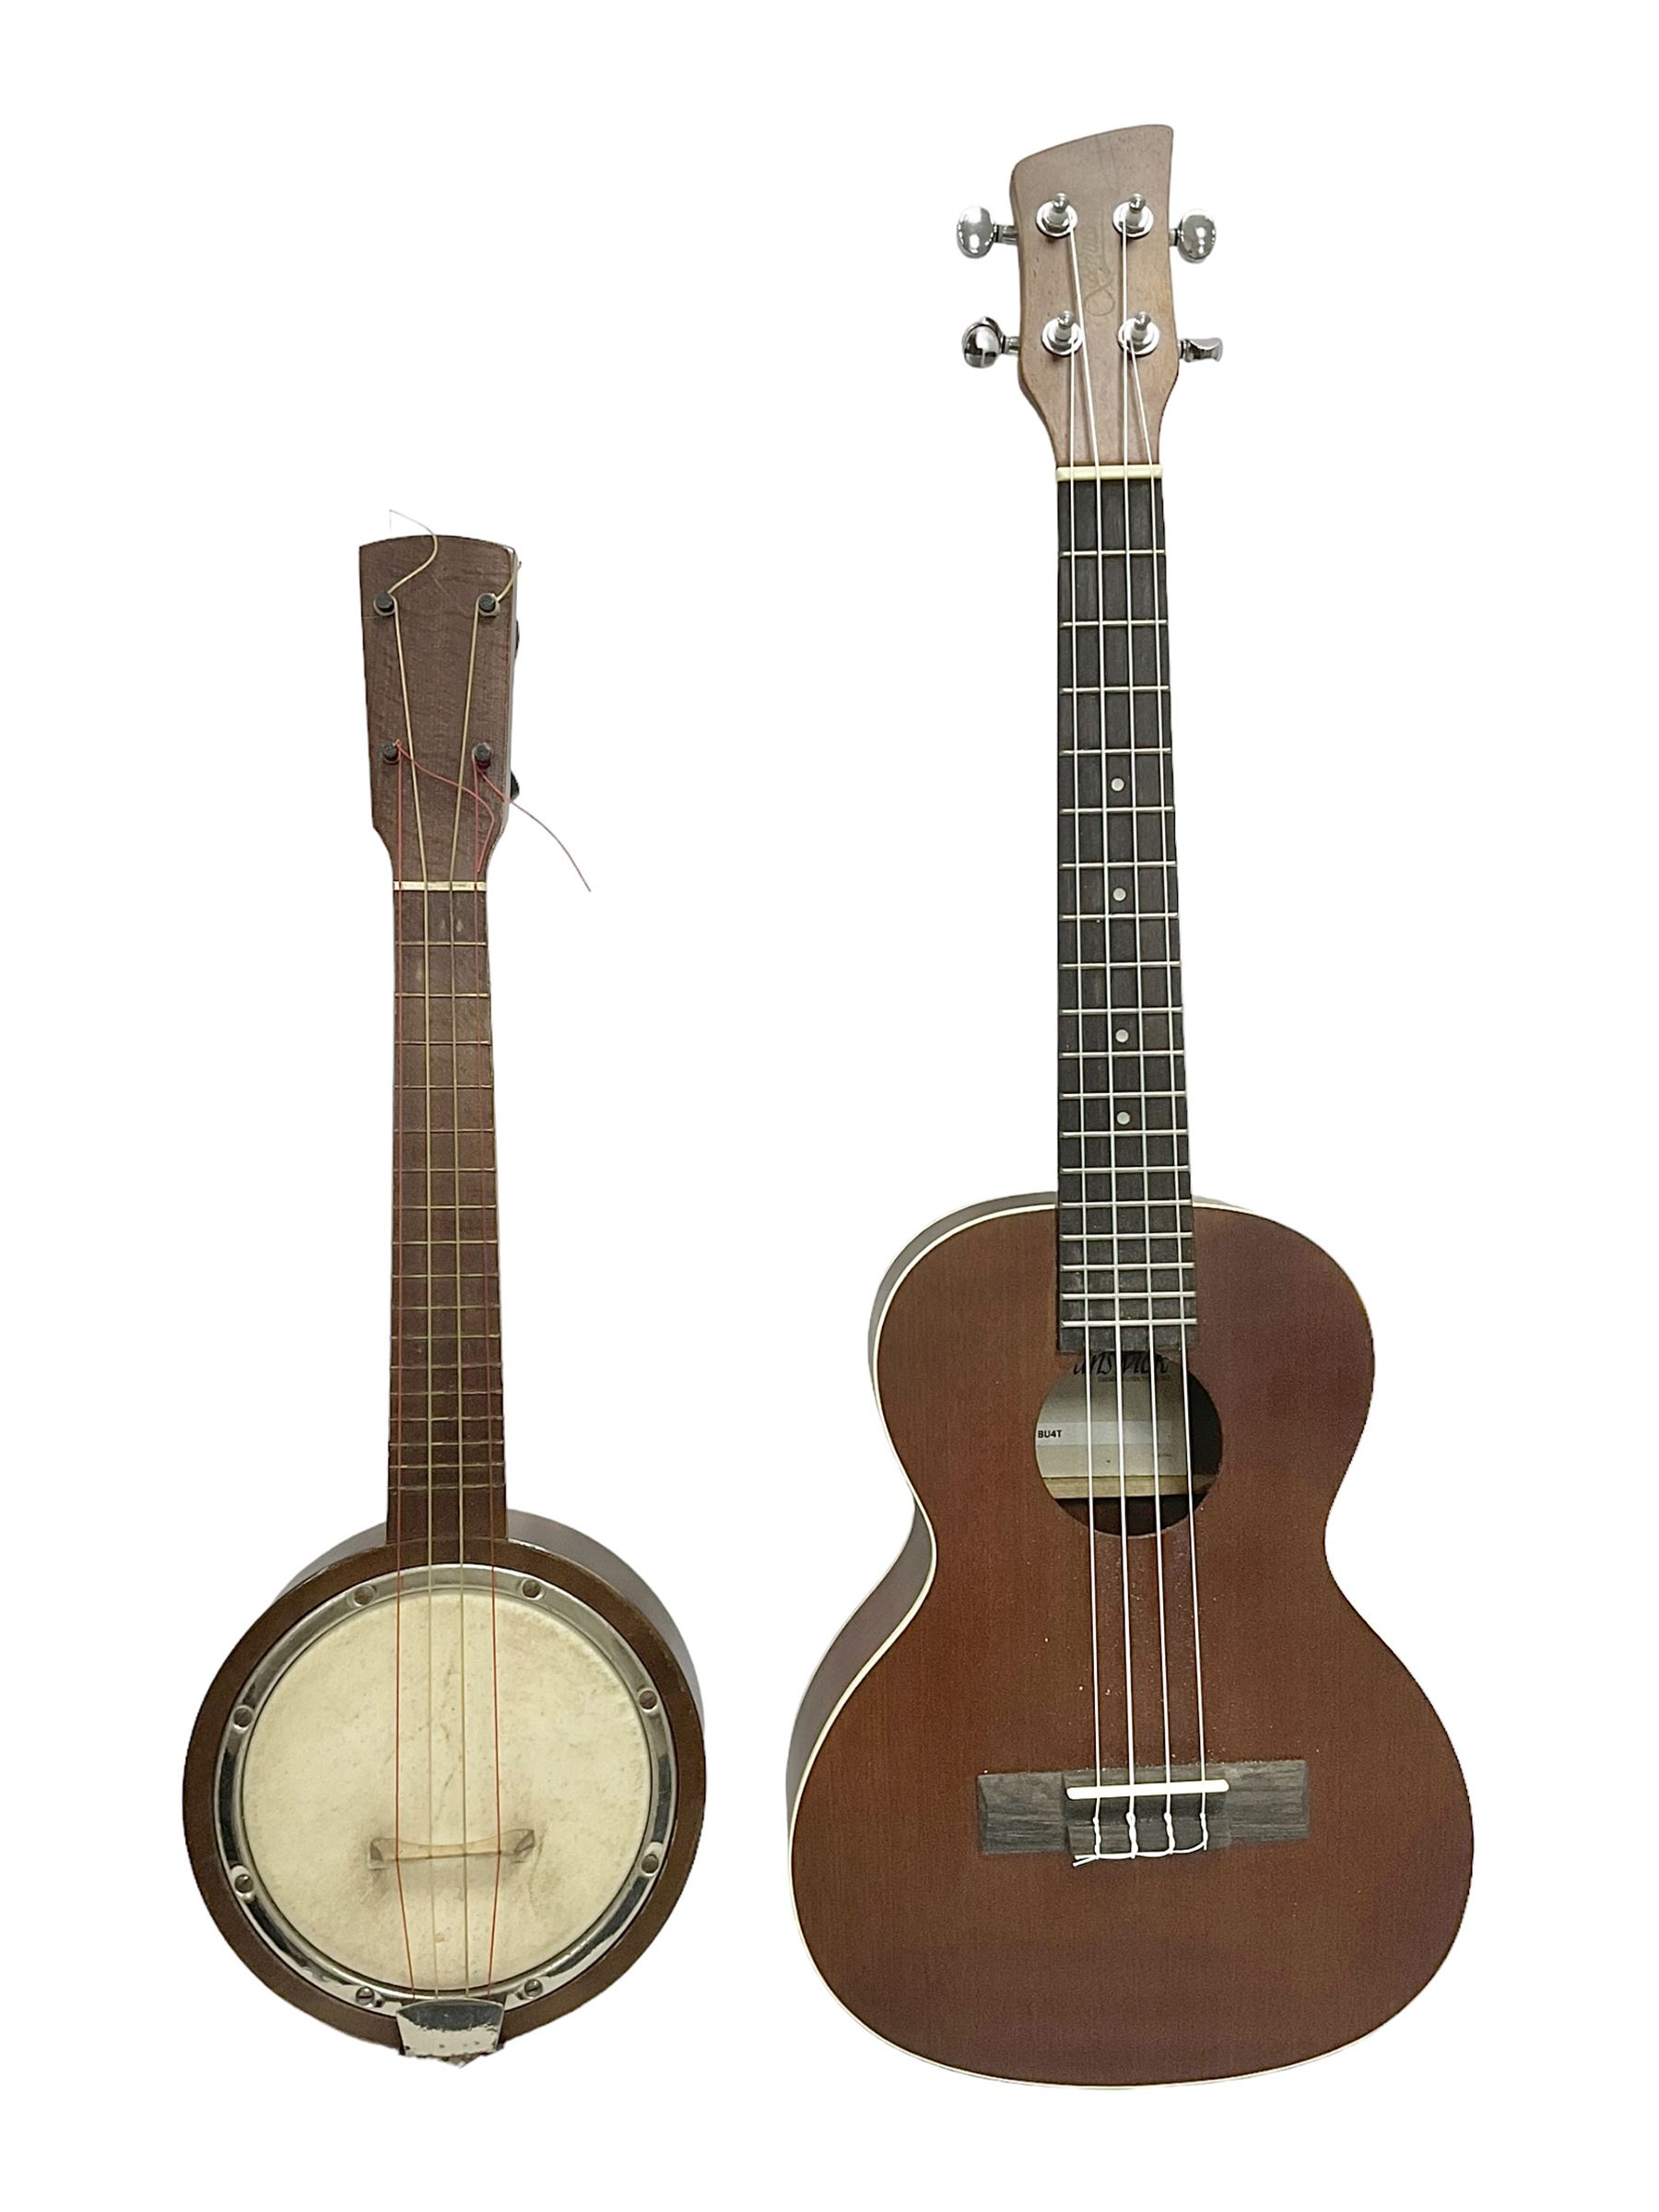 Brunswick Ukulele in a soft case with a earlier 20th century Banjo Ukulele in a lined and fitted cas